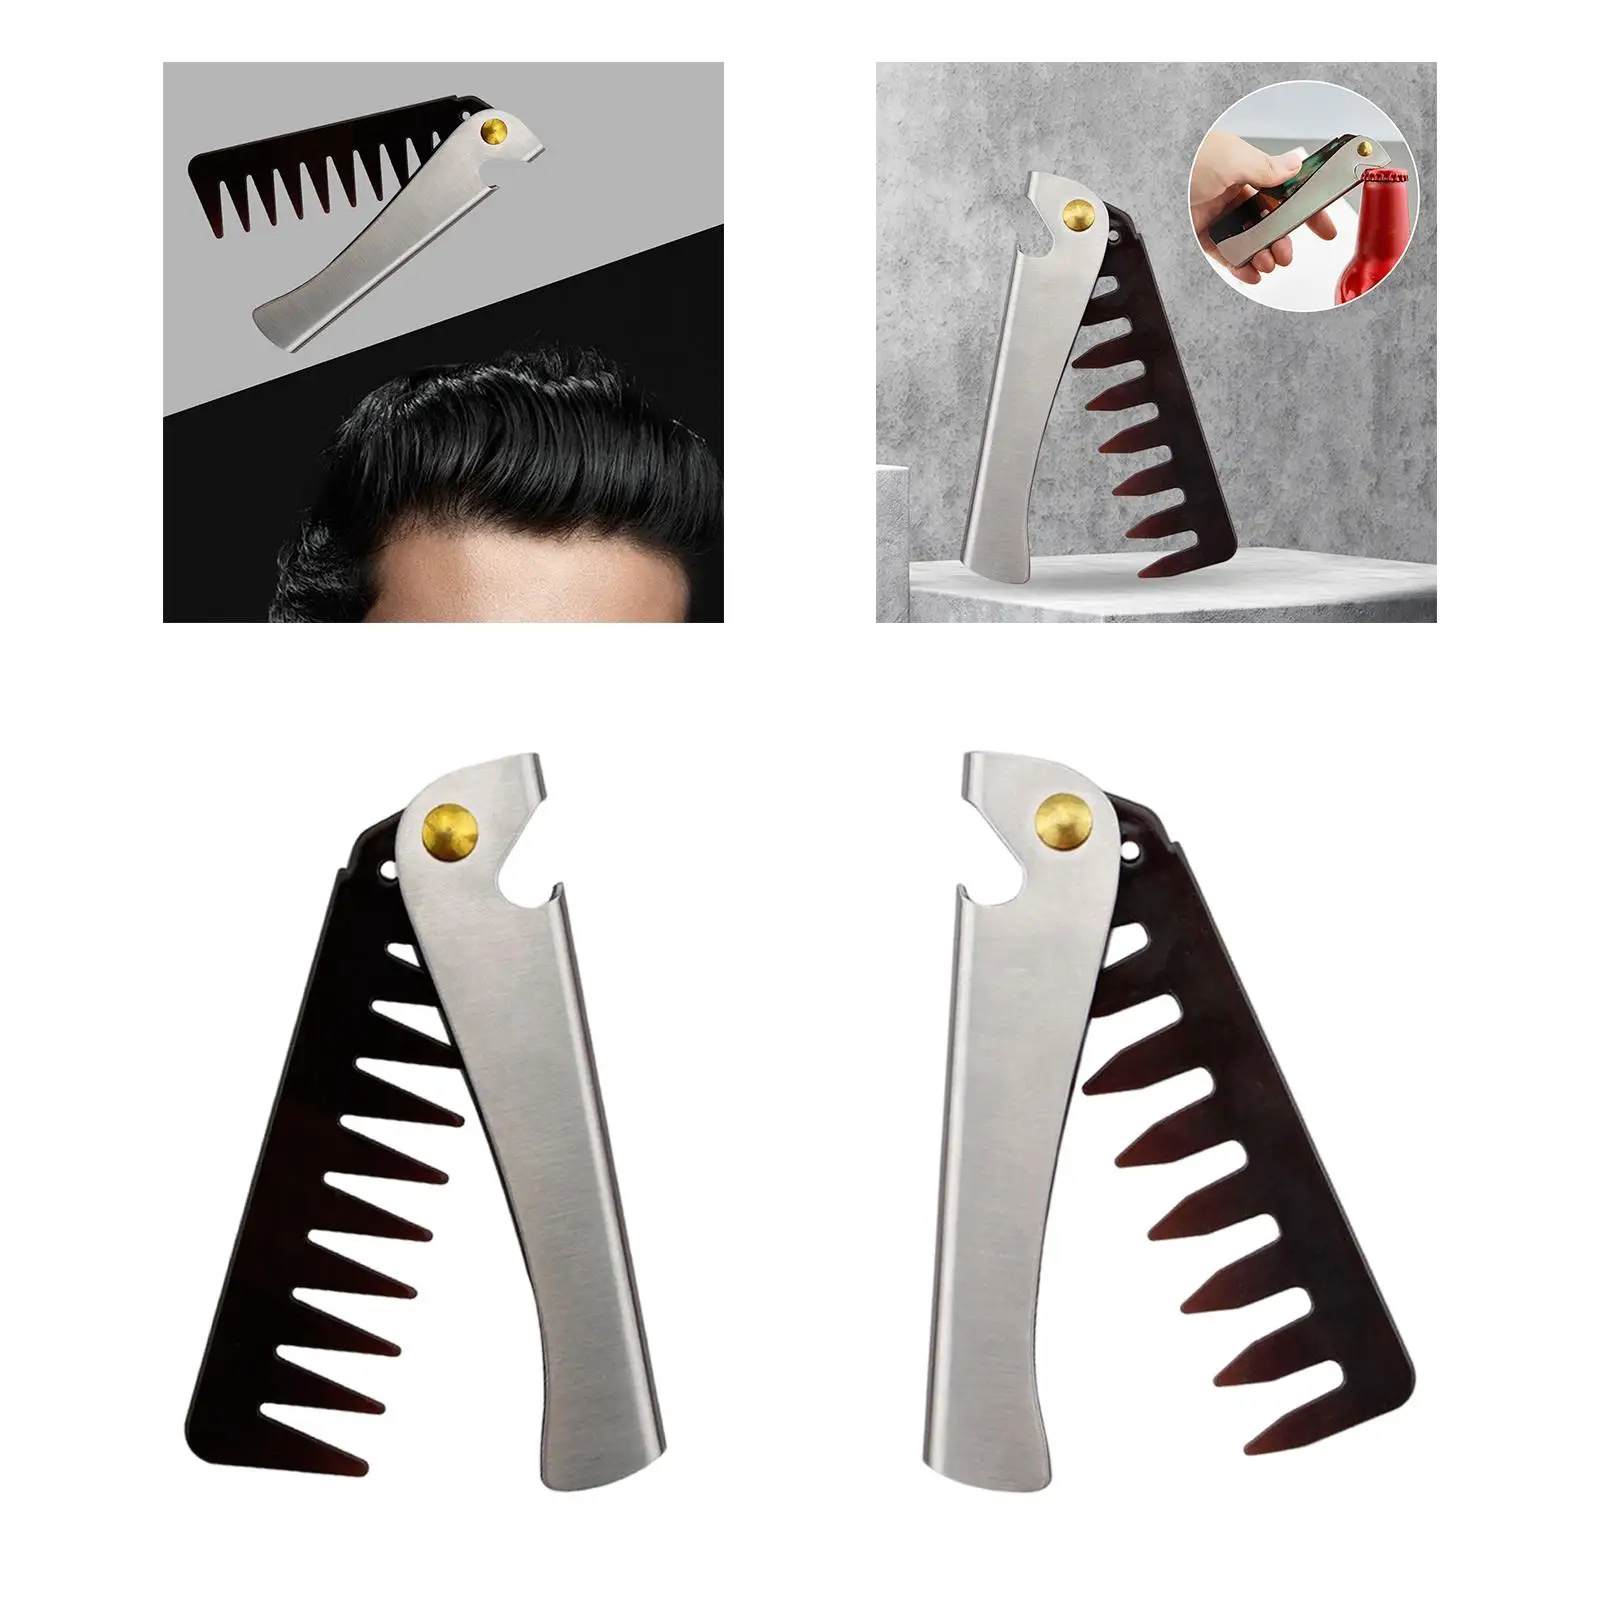 Portable Folding Beard Comb for Men Grooming Combing Hair Stainless Steel Pocket Comb for Stylists Home Use Travel